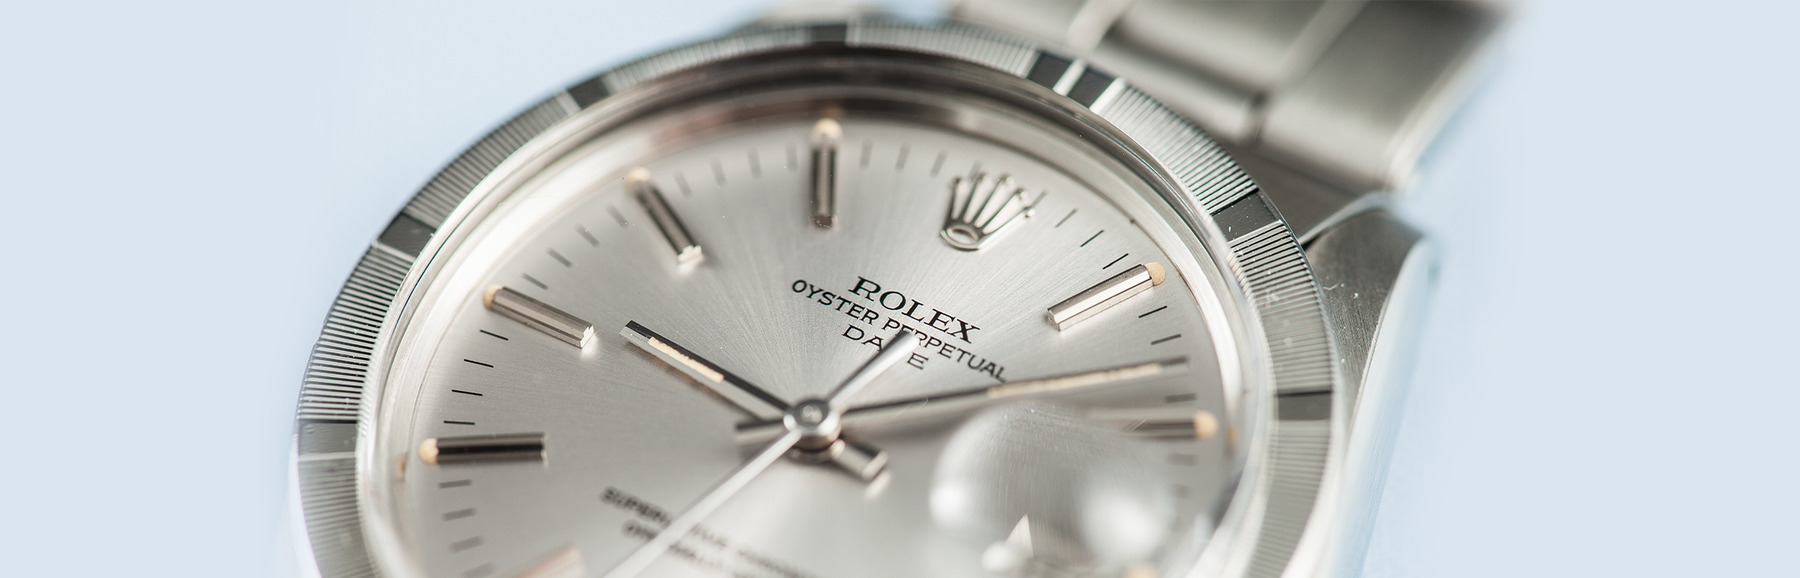 What Is the Most Affordable Rolex Watch?